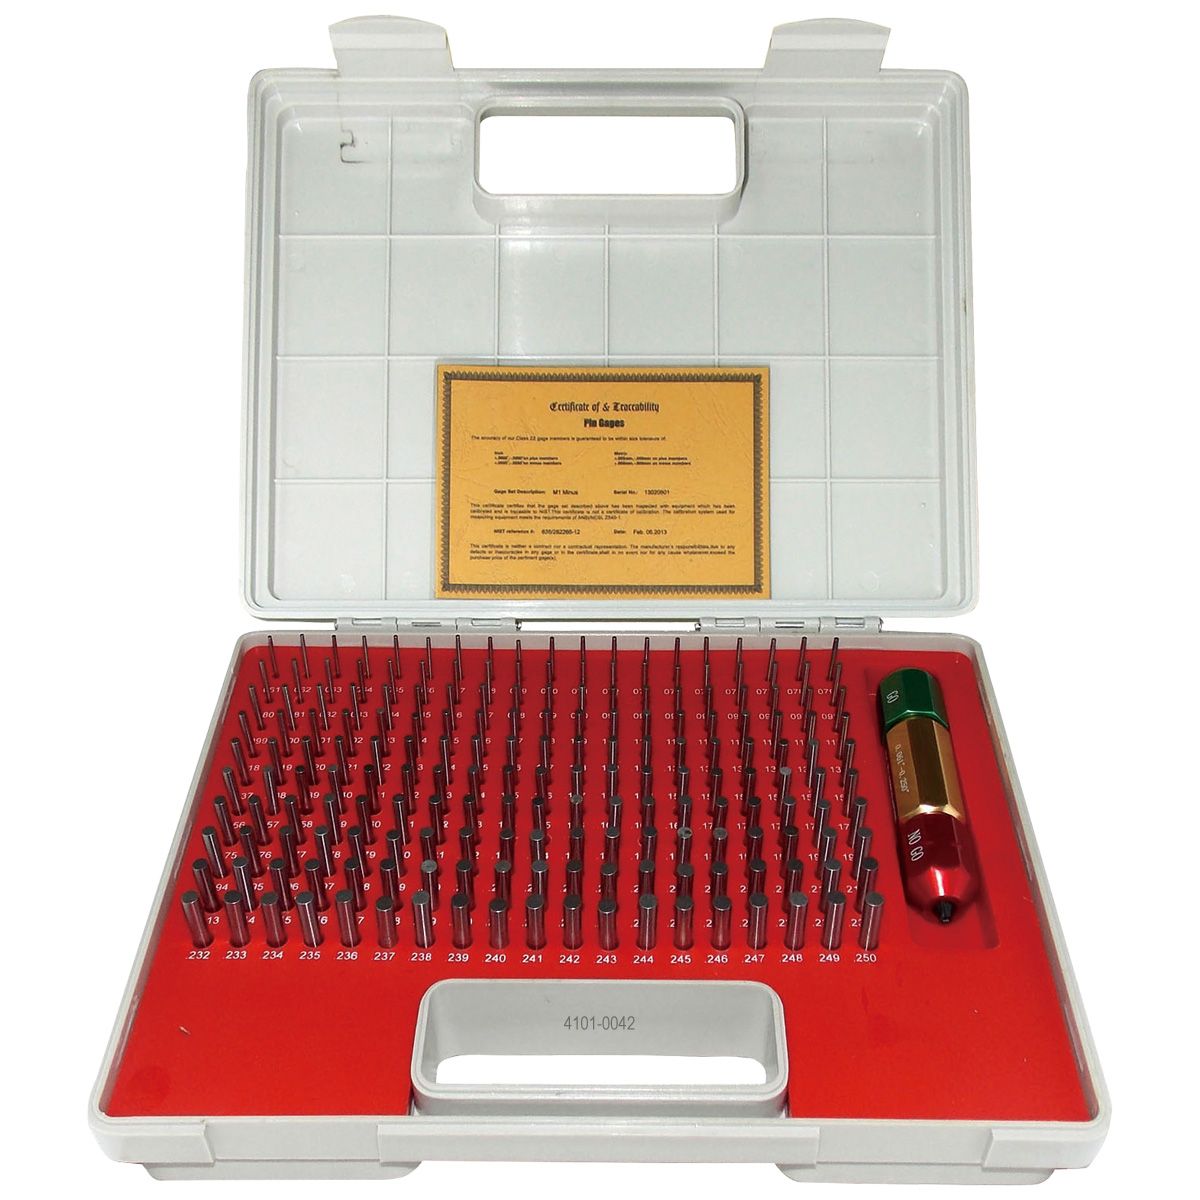 PRO-SERIES 250 PIECE .251-.500" PIN GAGE SET WITH CERTIFICATE (4101-0042)